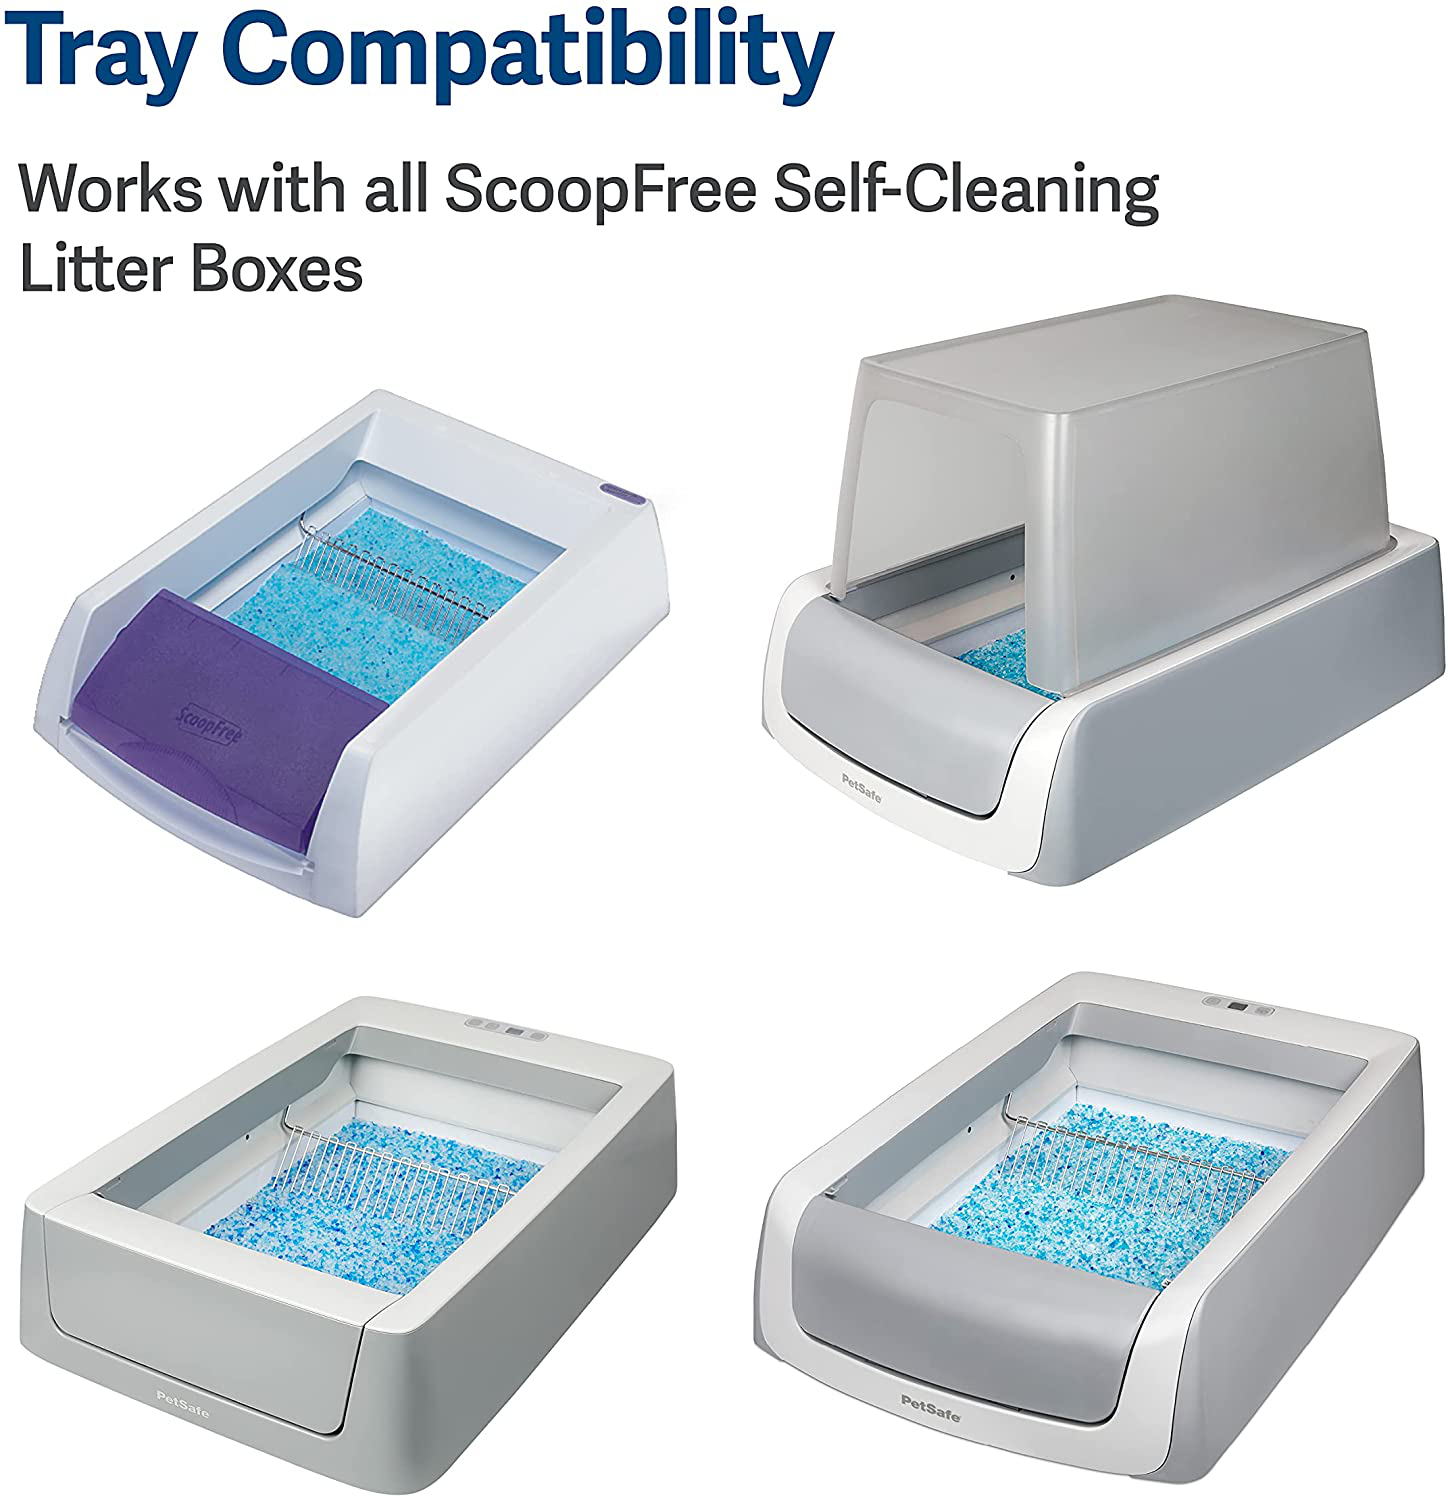 Petsafe Scoopfree Cat Litter Crystal Tray Refills for Scoopfree Self-Cleaning Cat Litter Boxes - 3-Pack - Non-Clumping, Less Mess, Odor Control - Available in Original Blue, Lavender, or Sensitive